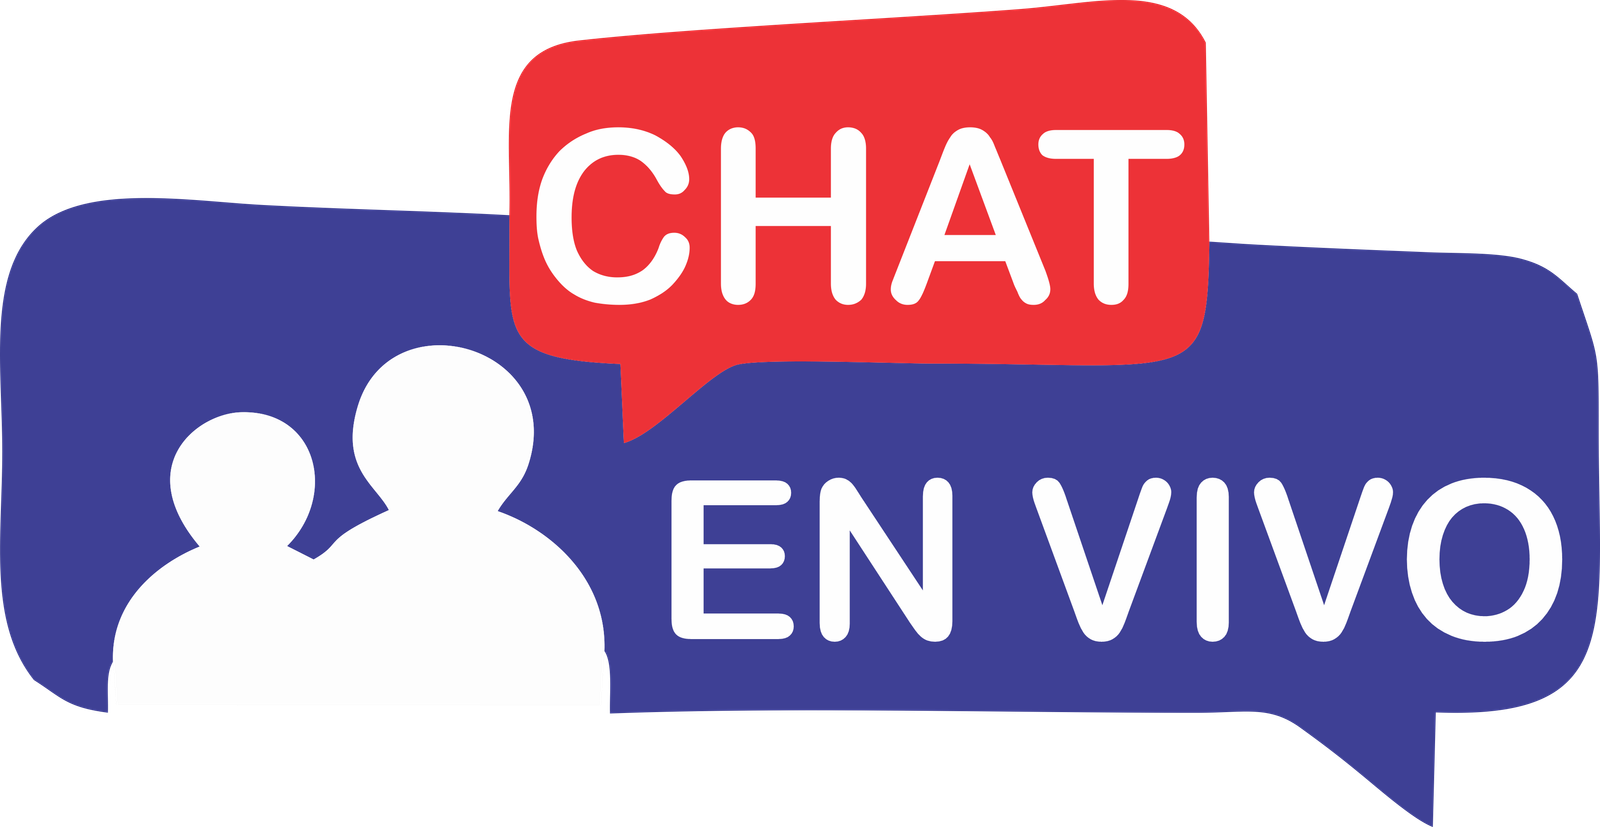 1-CHAT